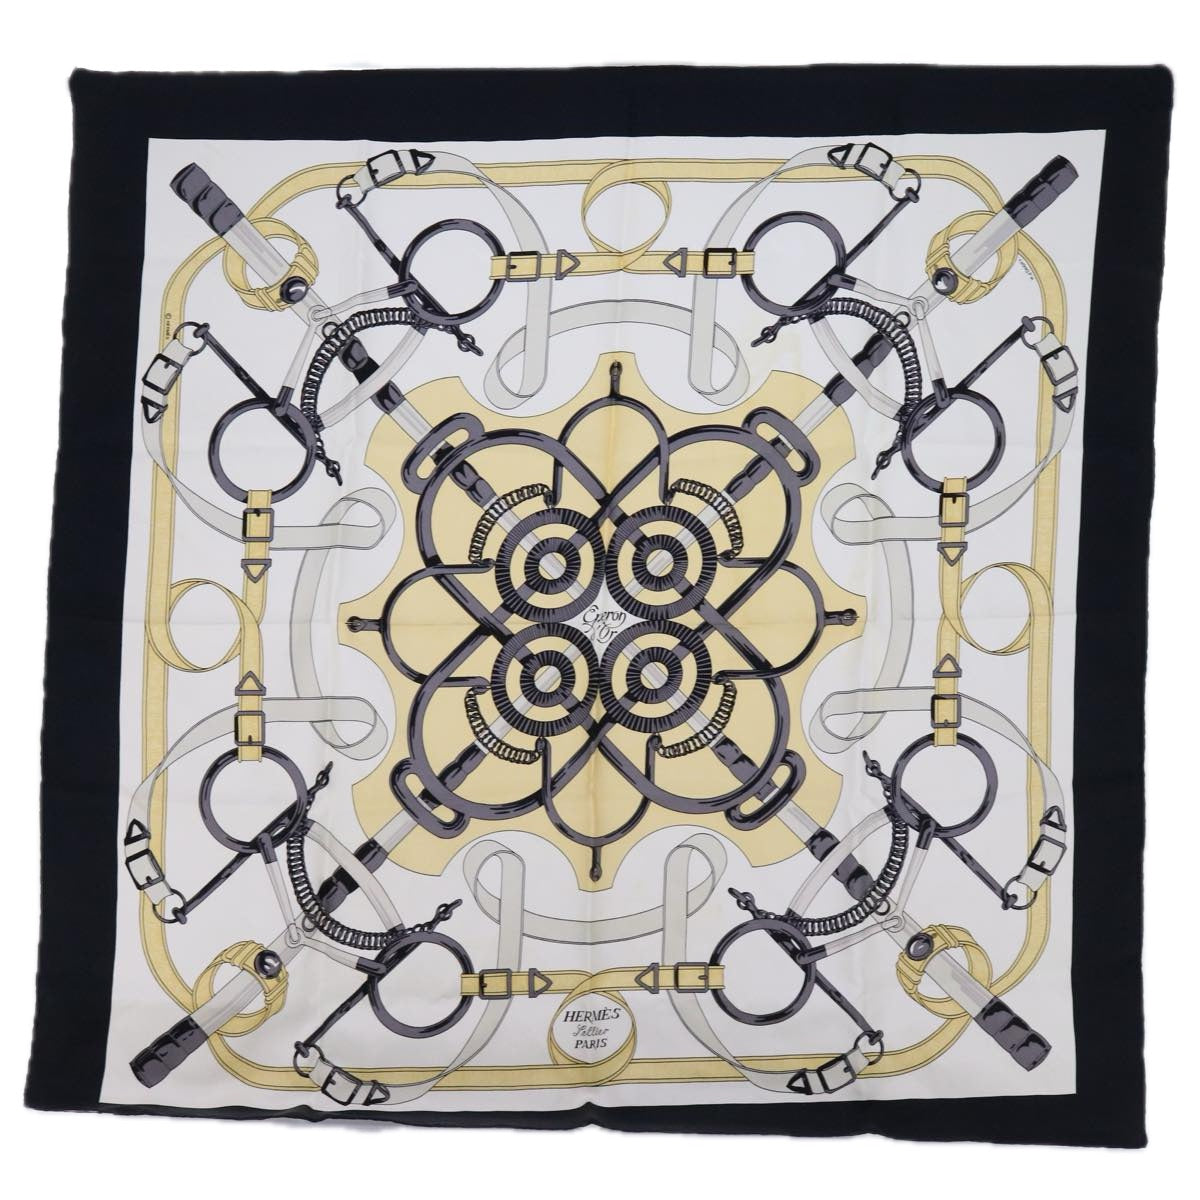 HERMES Carre 90 Eperon d’Or Scarf Silk Black White Auth am5304